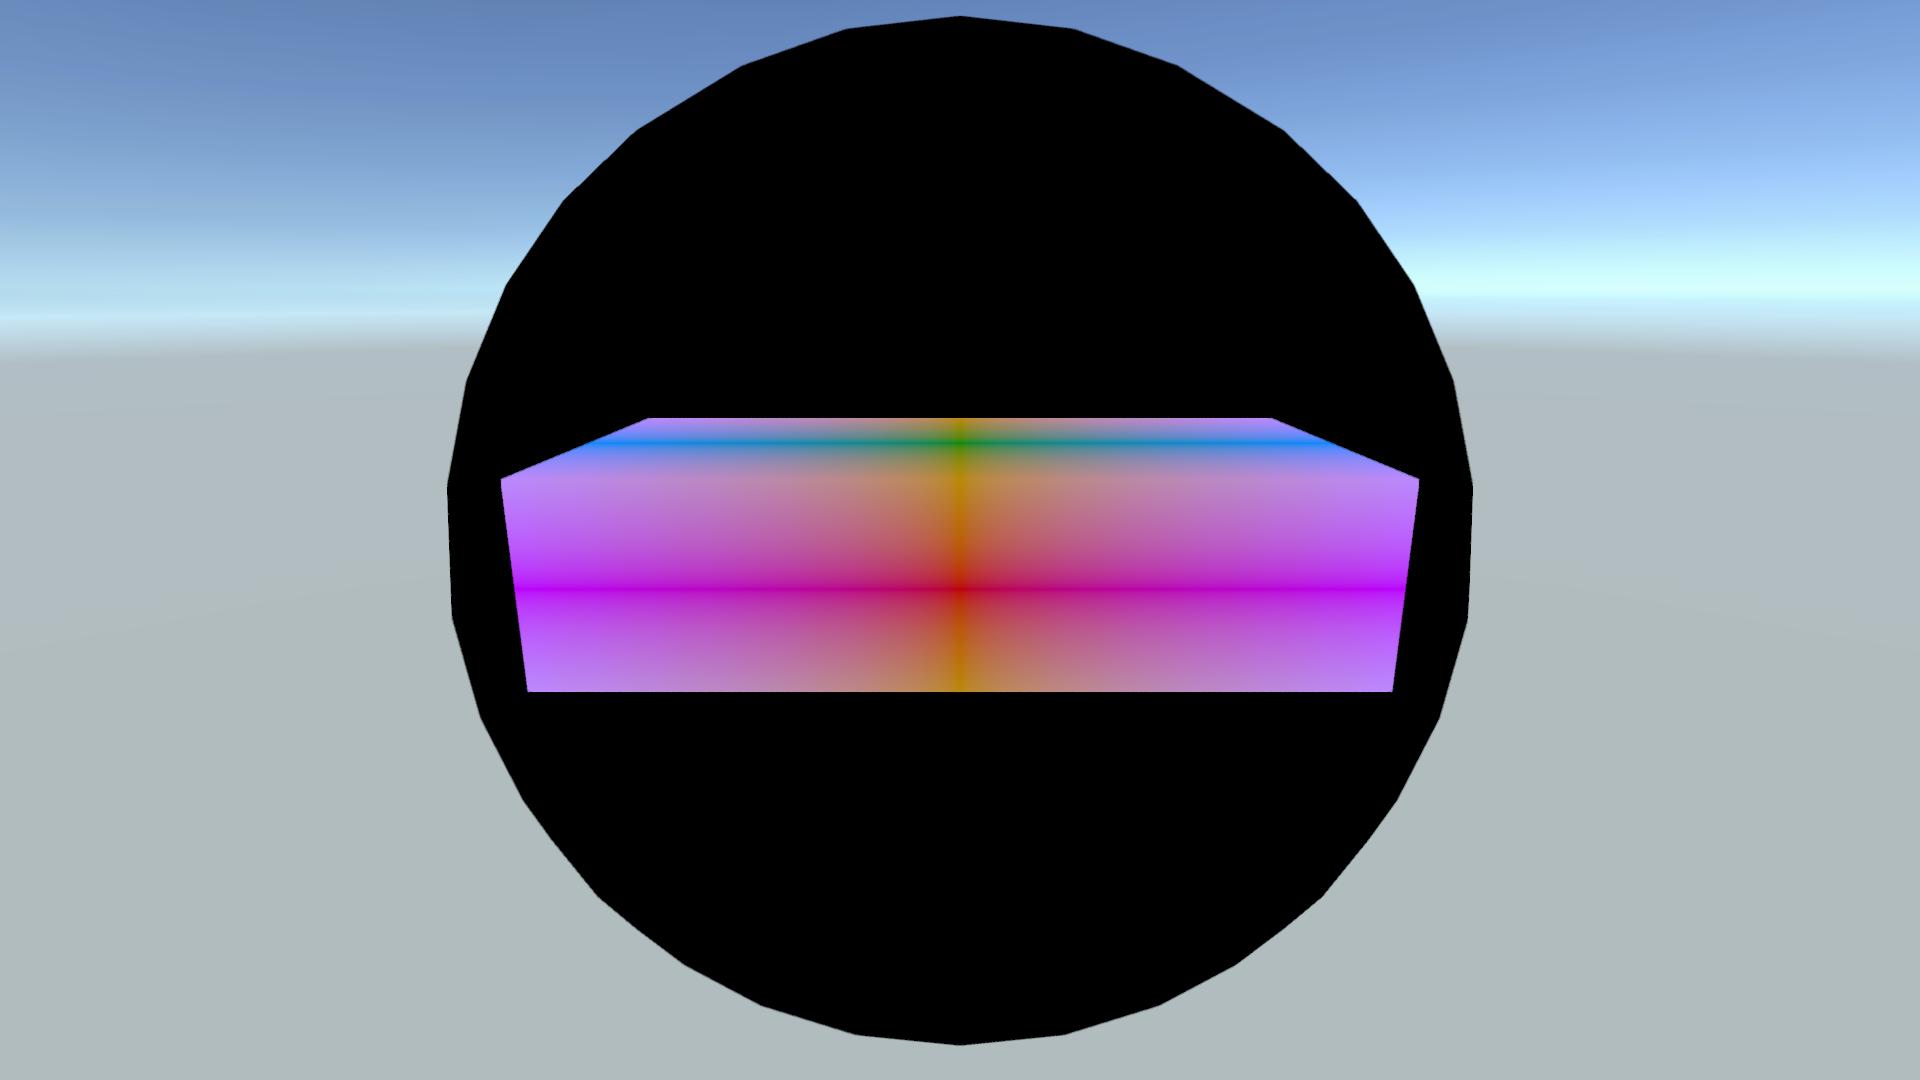 Box on a 50 scale sphere object with parameters \(s_x = 10\), \(s_y = 5\), \(s_z = 20\) and distance scale = 20